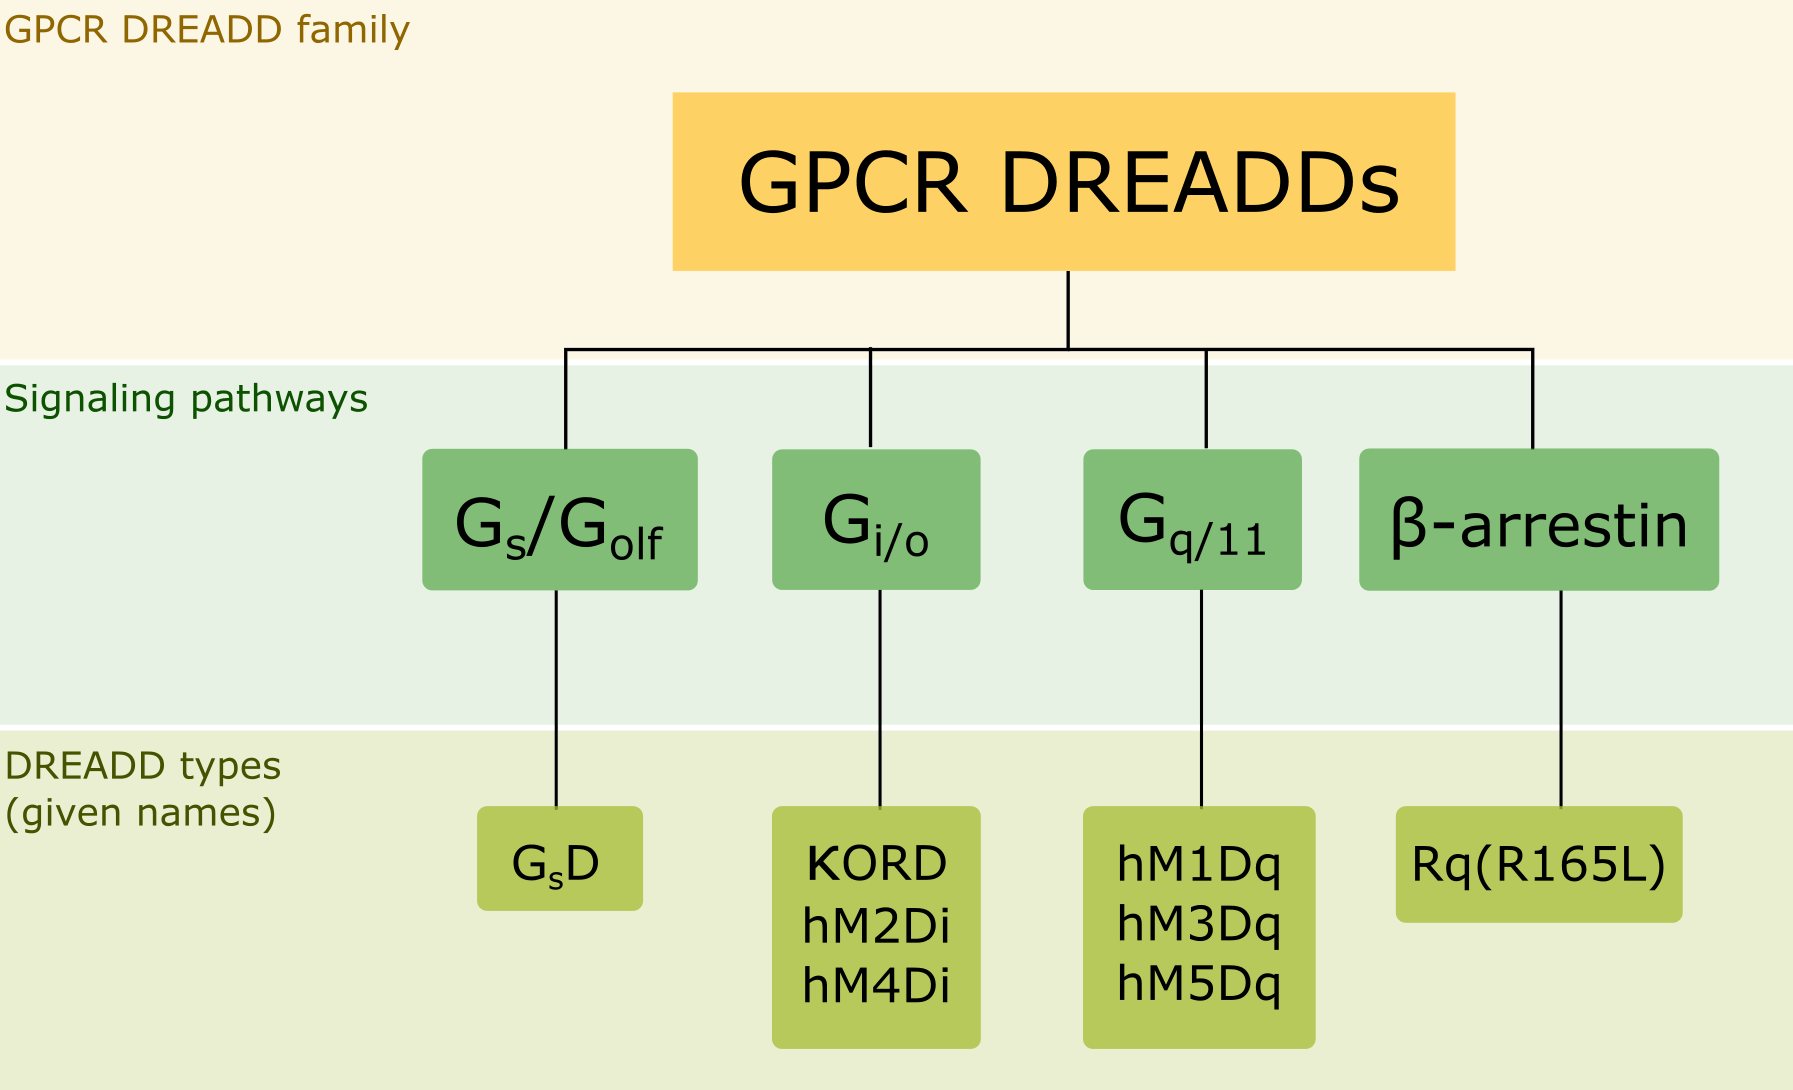 Categorization of DREADDs according to signal transduction mechanisms that they tether